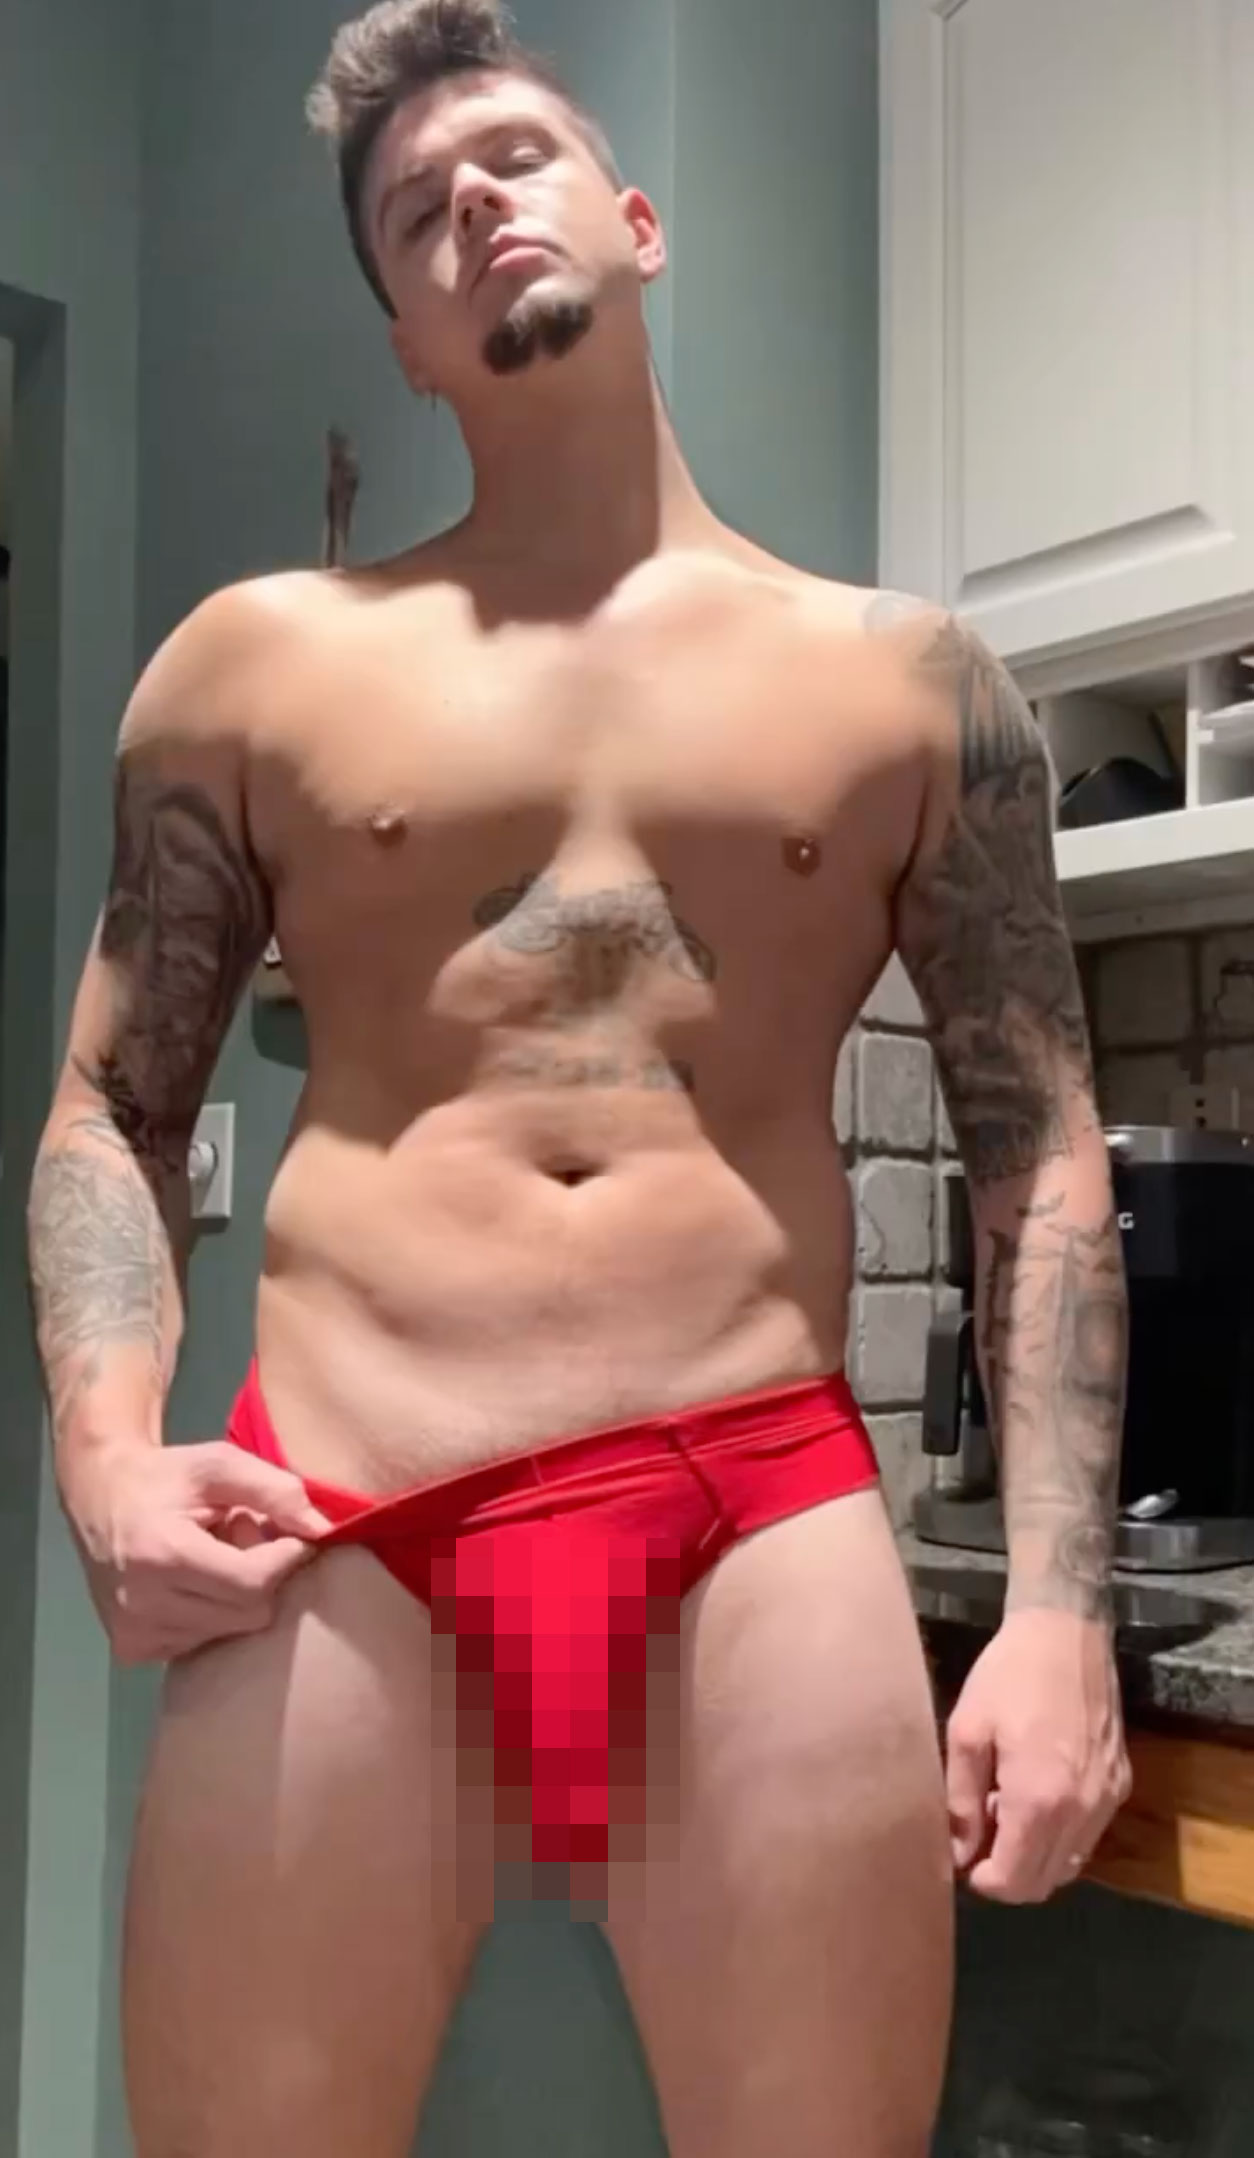 The MTV personality has been showing off his body on the NSFW platform since shedding weight